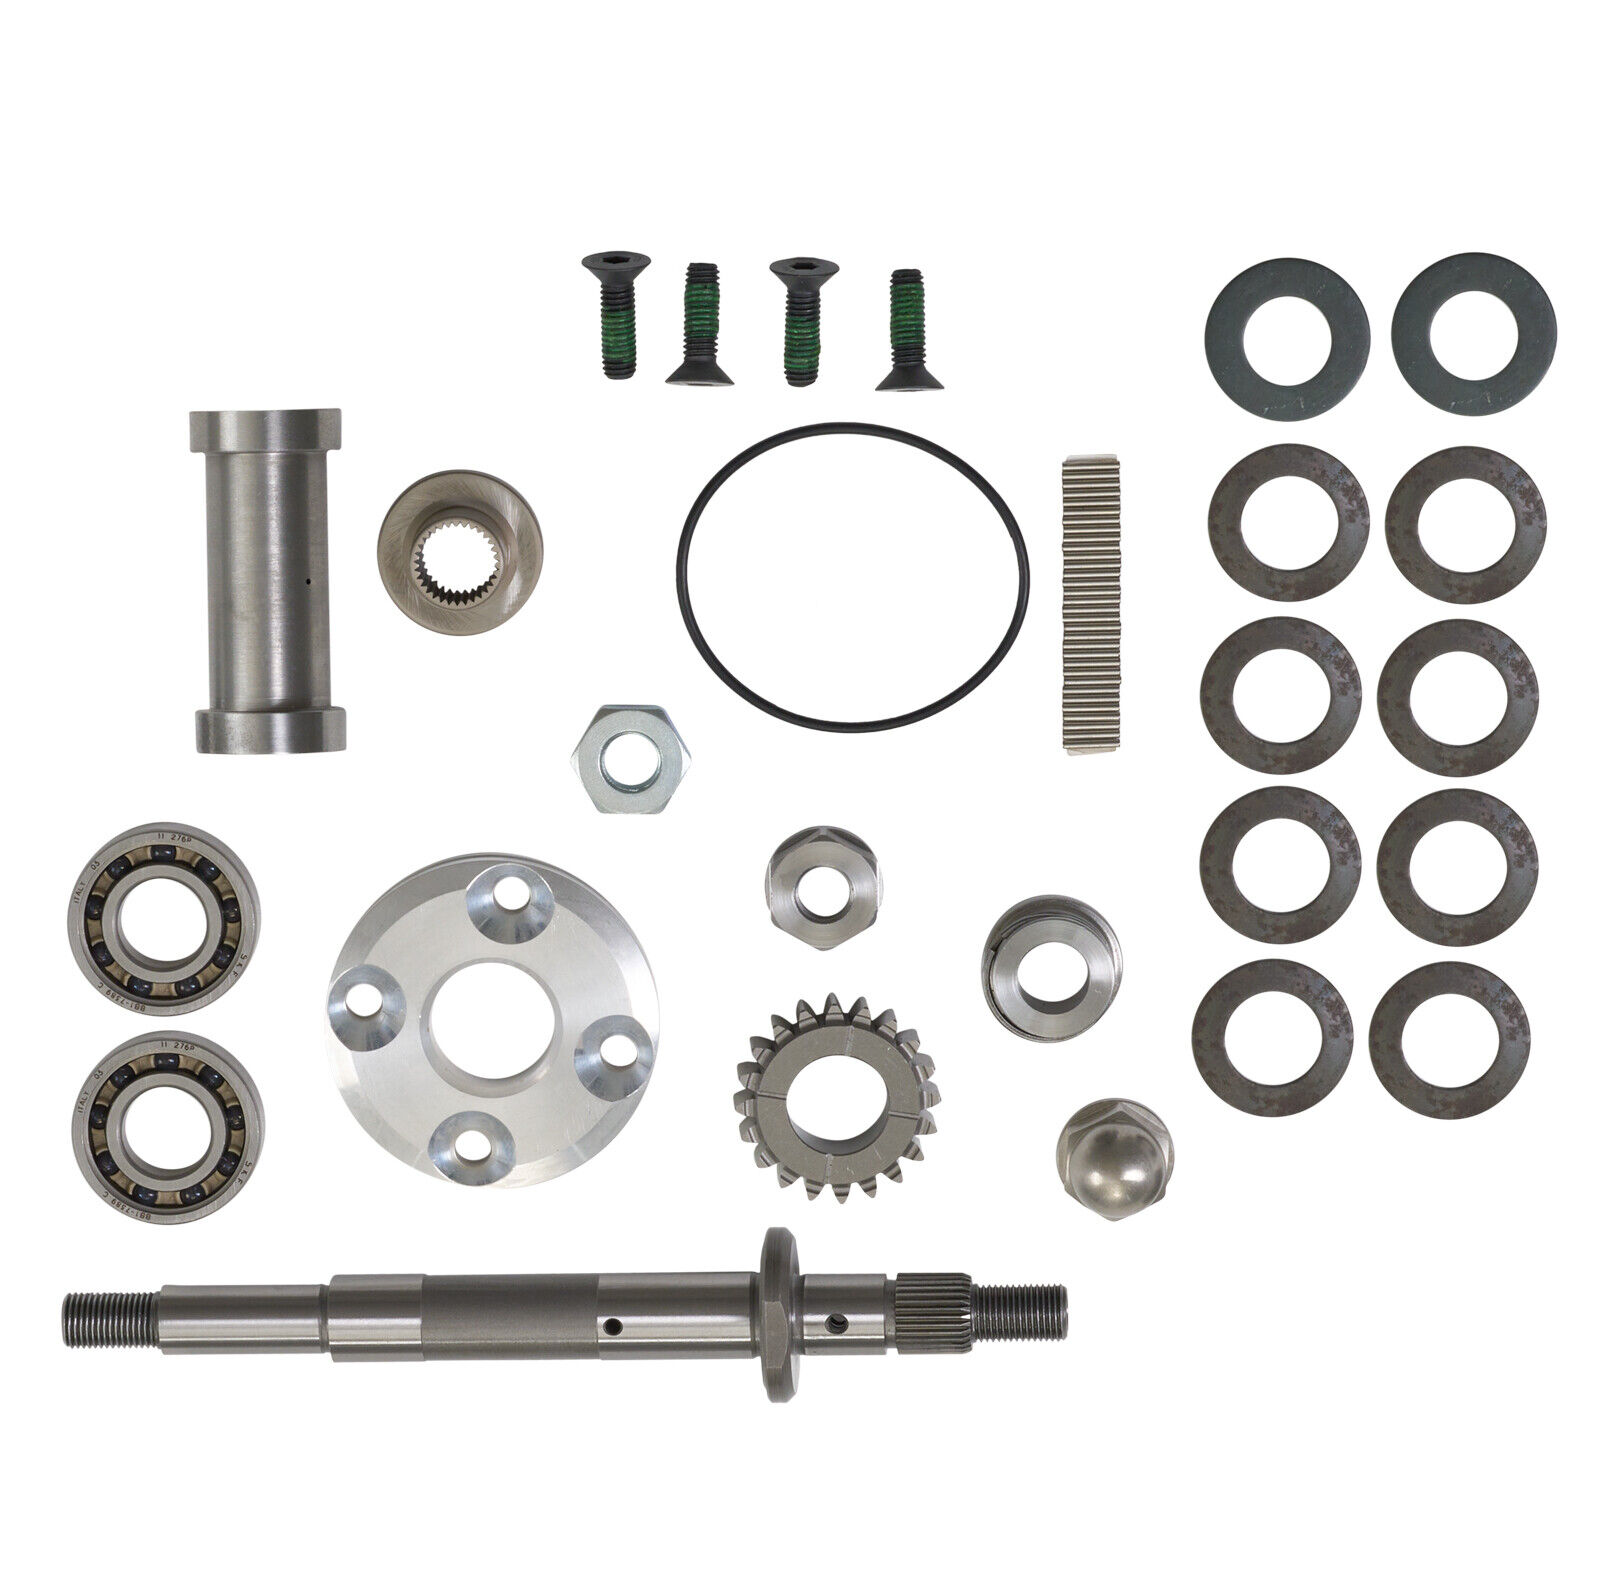 SBT 20 Tooth Supercharger Rebuild Kit for Sea-Doo 300 34-300